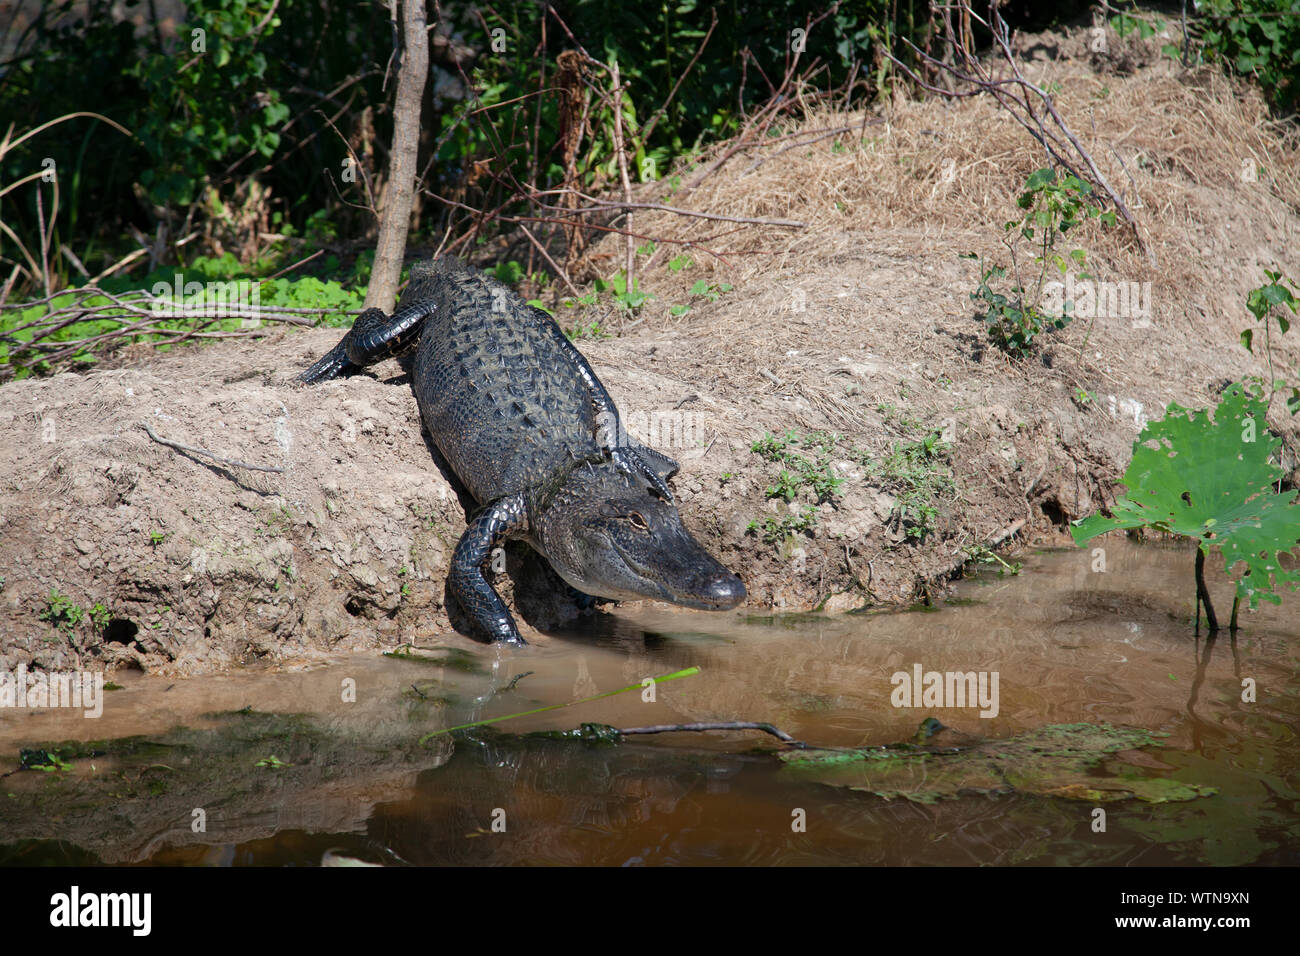 An American alligator on the bank of a lake in East Texas. Stock Photo